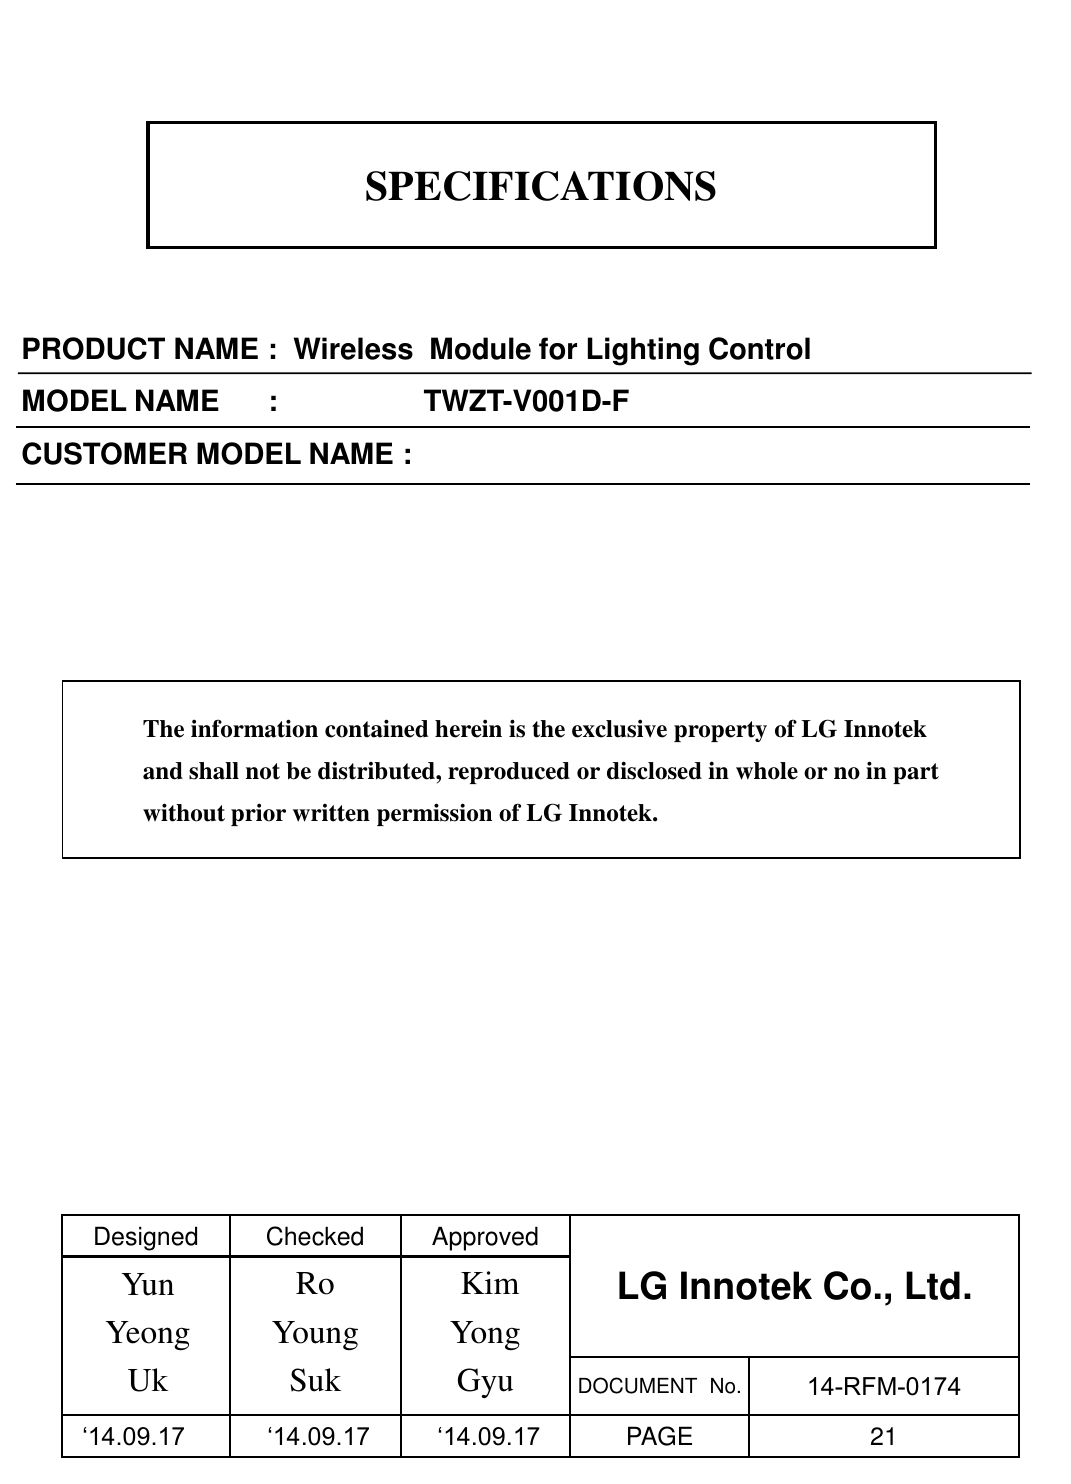 SPECIFICATIONS PRODUCT NAME :  Wireless  Module for Lighting Control MODEL NAME      :                  TWZT-V001D-F CUSTOMER MODEL NAME : Designed  Checked  Approved LG Innotek Co., Ltd.    Ro Young Suk  Kim Yong Gyu  DOCUMENT  No.  14-RFM-0174      ‘14.09.17   ‘14.09.17   ‘14.09.17  PAGE  21 The information contained herein is the exclusive property of LG Innotek and shall not be distributed, reproduced or disclosed in whole or no in part without prior written permission of LG Innotek. Yun Yeong Uk 